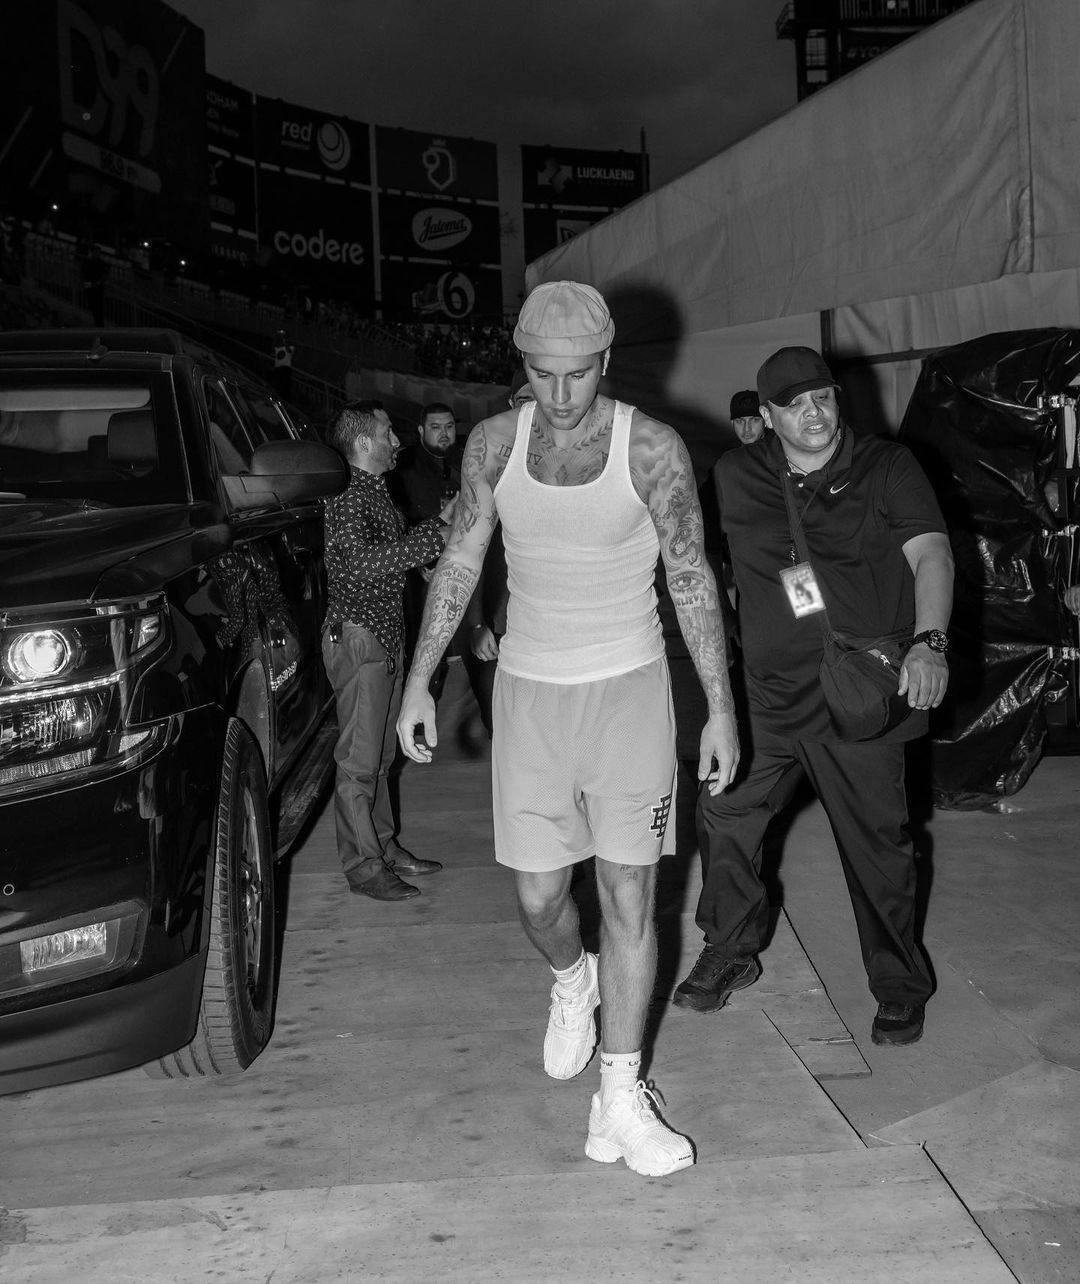 In a black and white photo, Justin Bieber sports a white tank and shorts.